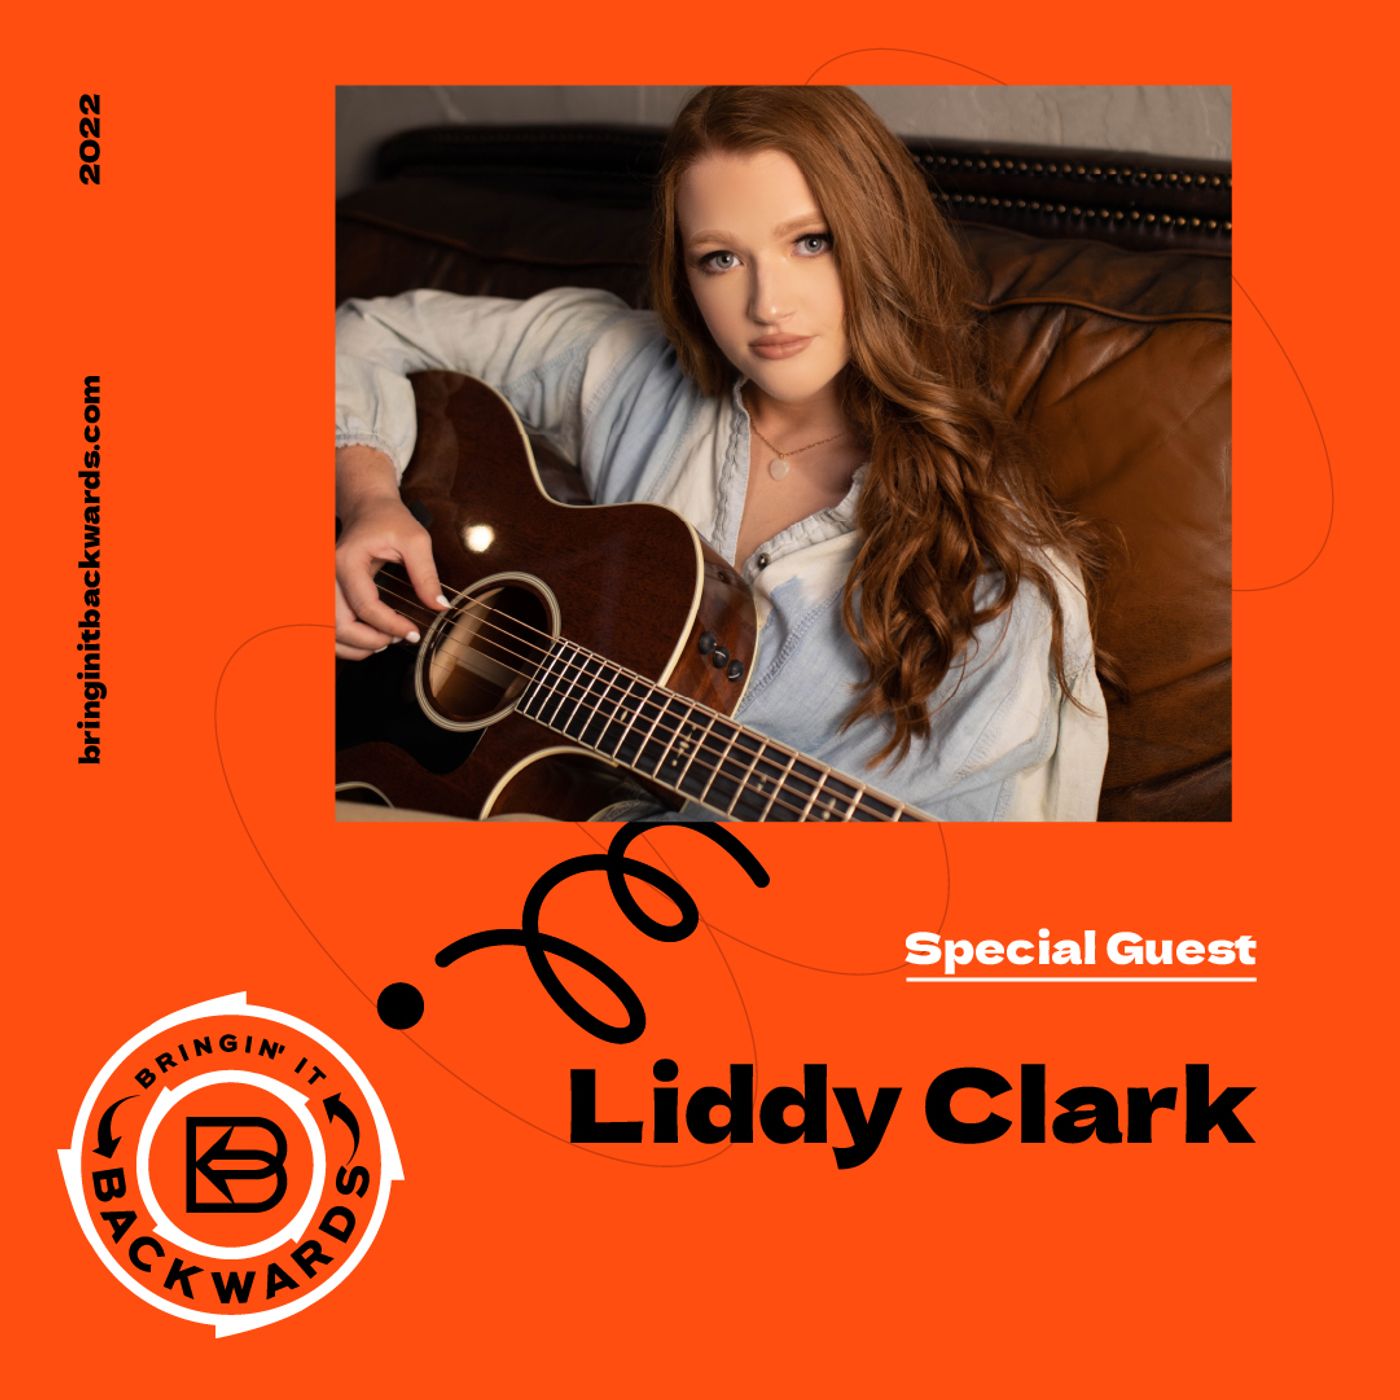 Interview with Liddy Clark Image